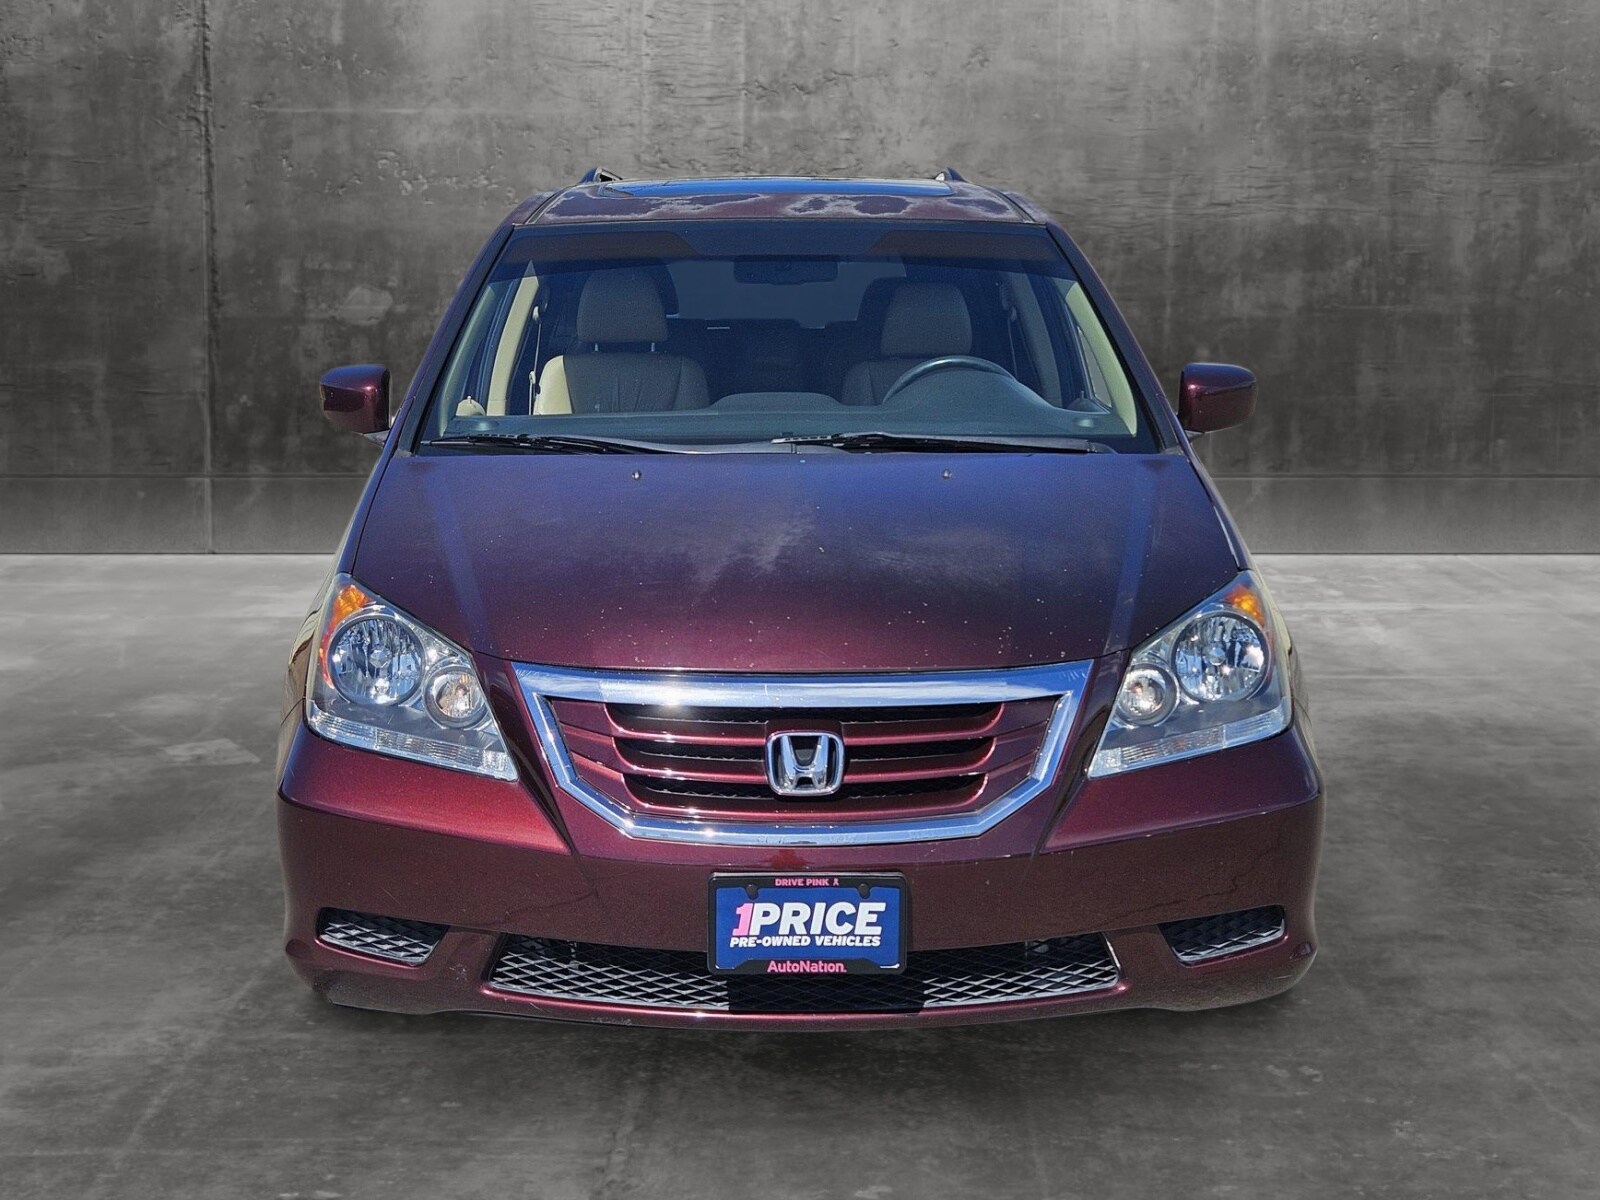 Used 2009 Honda Odyssey EX-L with VIN 5FNRL38749B006237 for sale in Las Vegas, NV